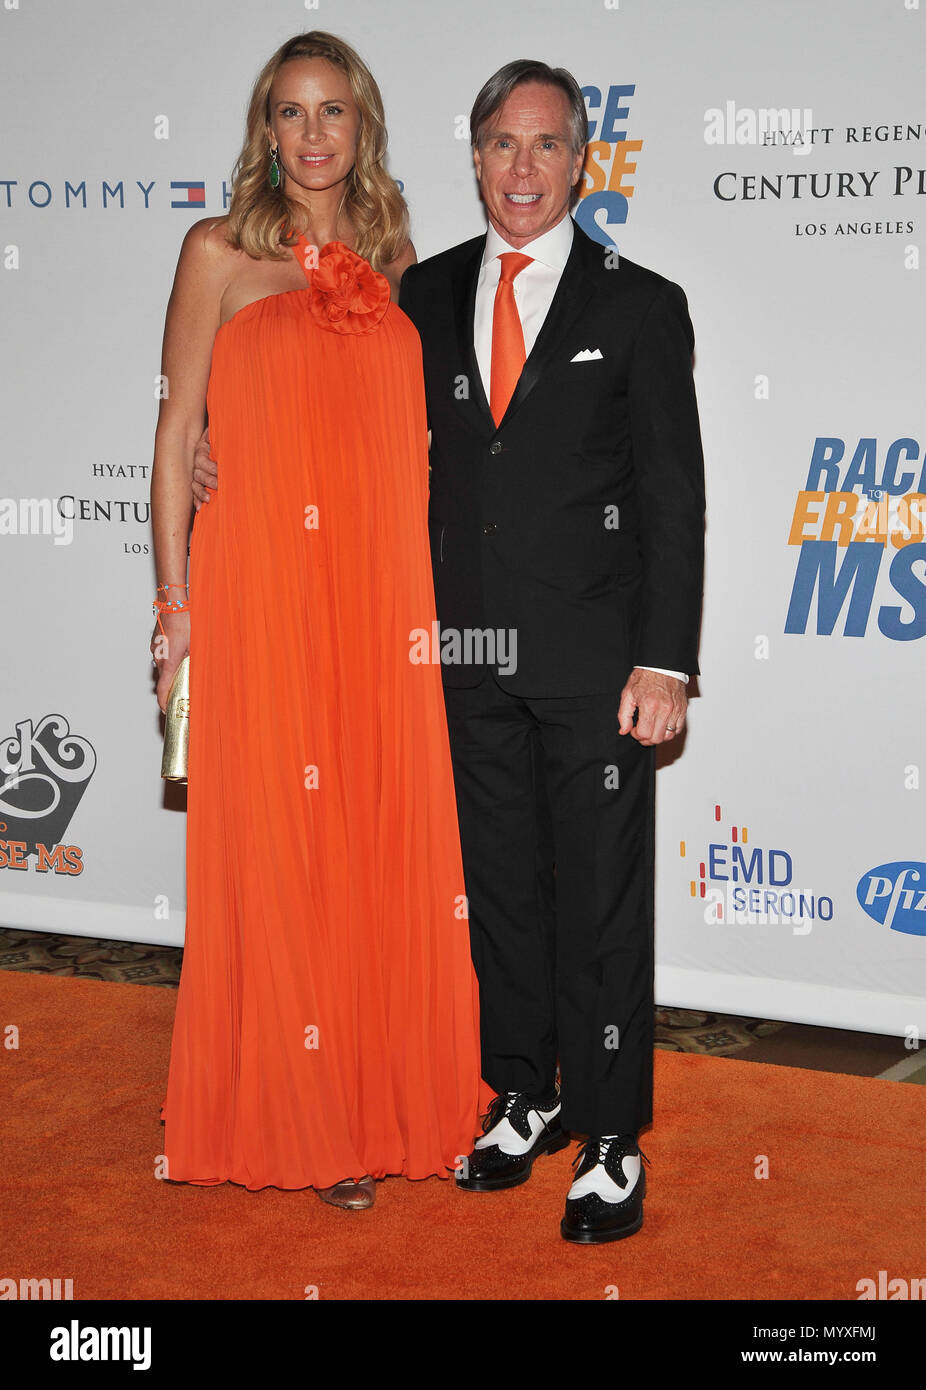 Tommy Hilfiger and wife Dee Ocleppo- Race to Erase Ms at the Hyatt Regency  Century Plaza Hotel in Los Angeles. HilfigerTommy wife 32 Event in  Hollywood Life - California, Red Carpet Event,